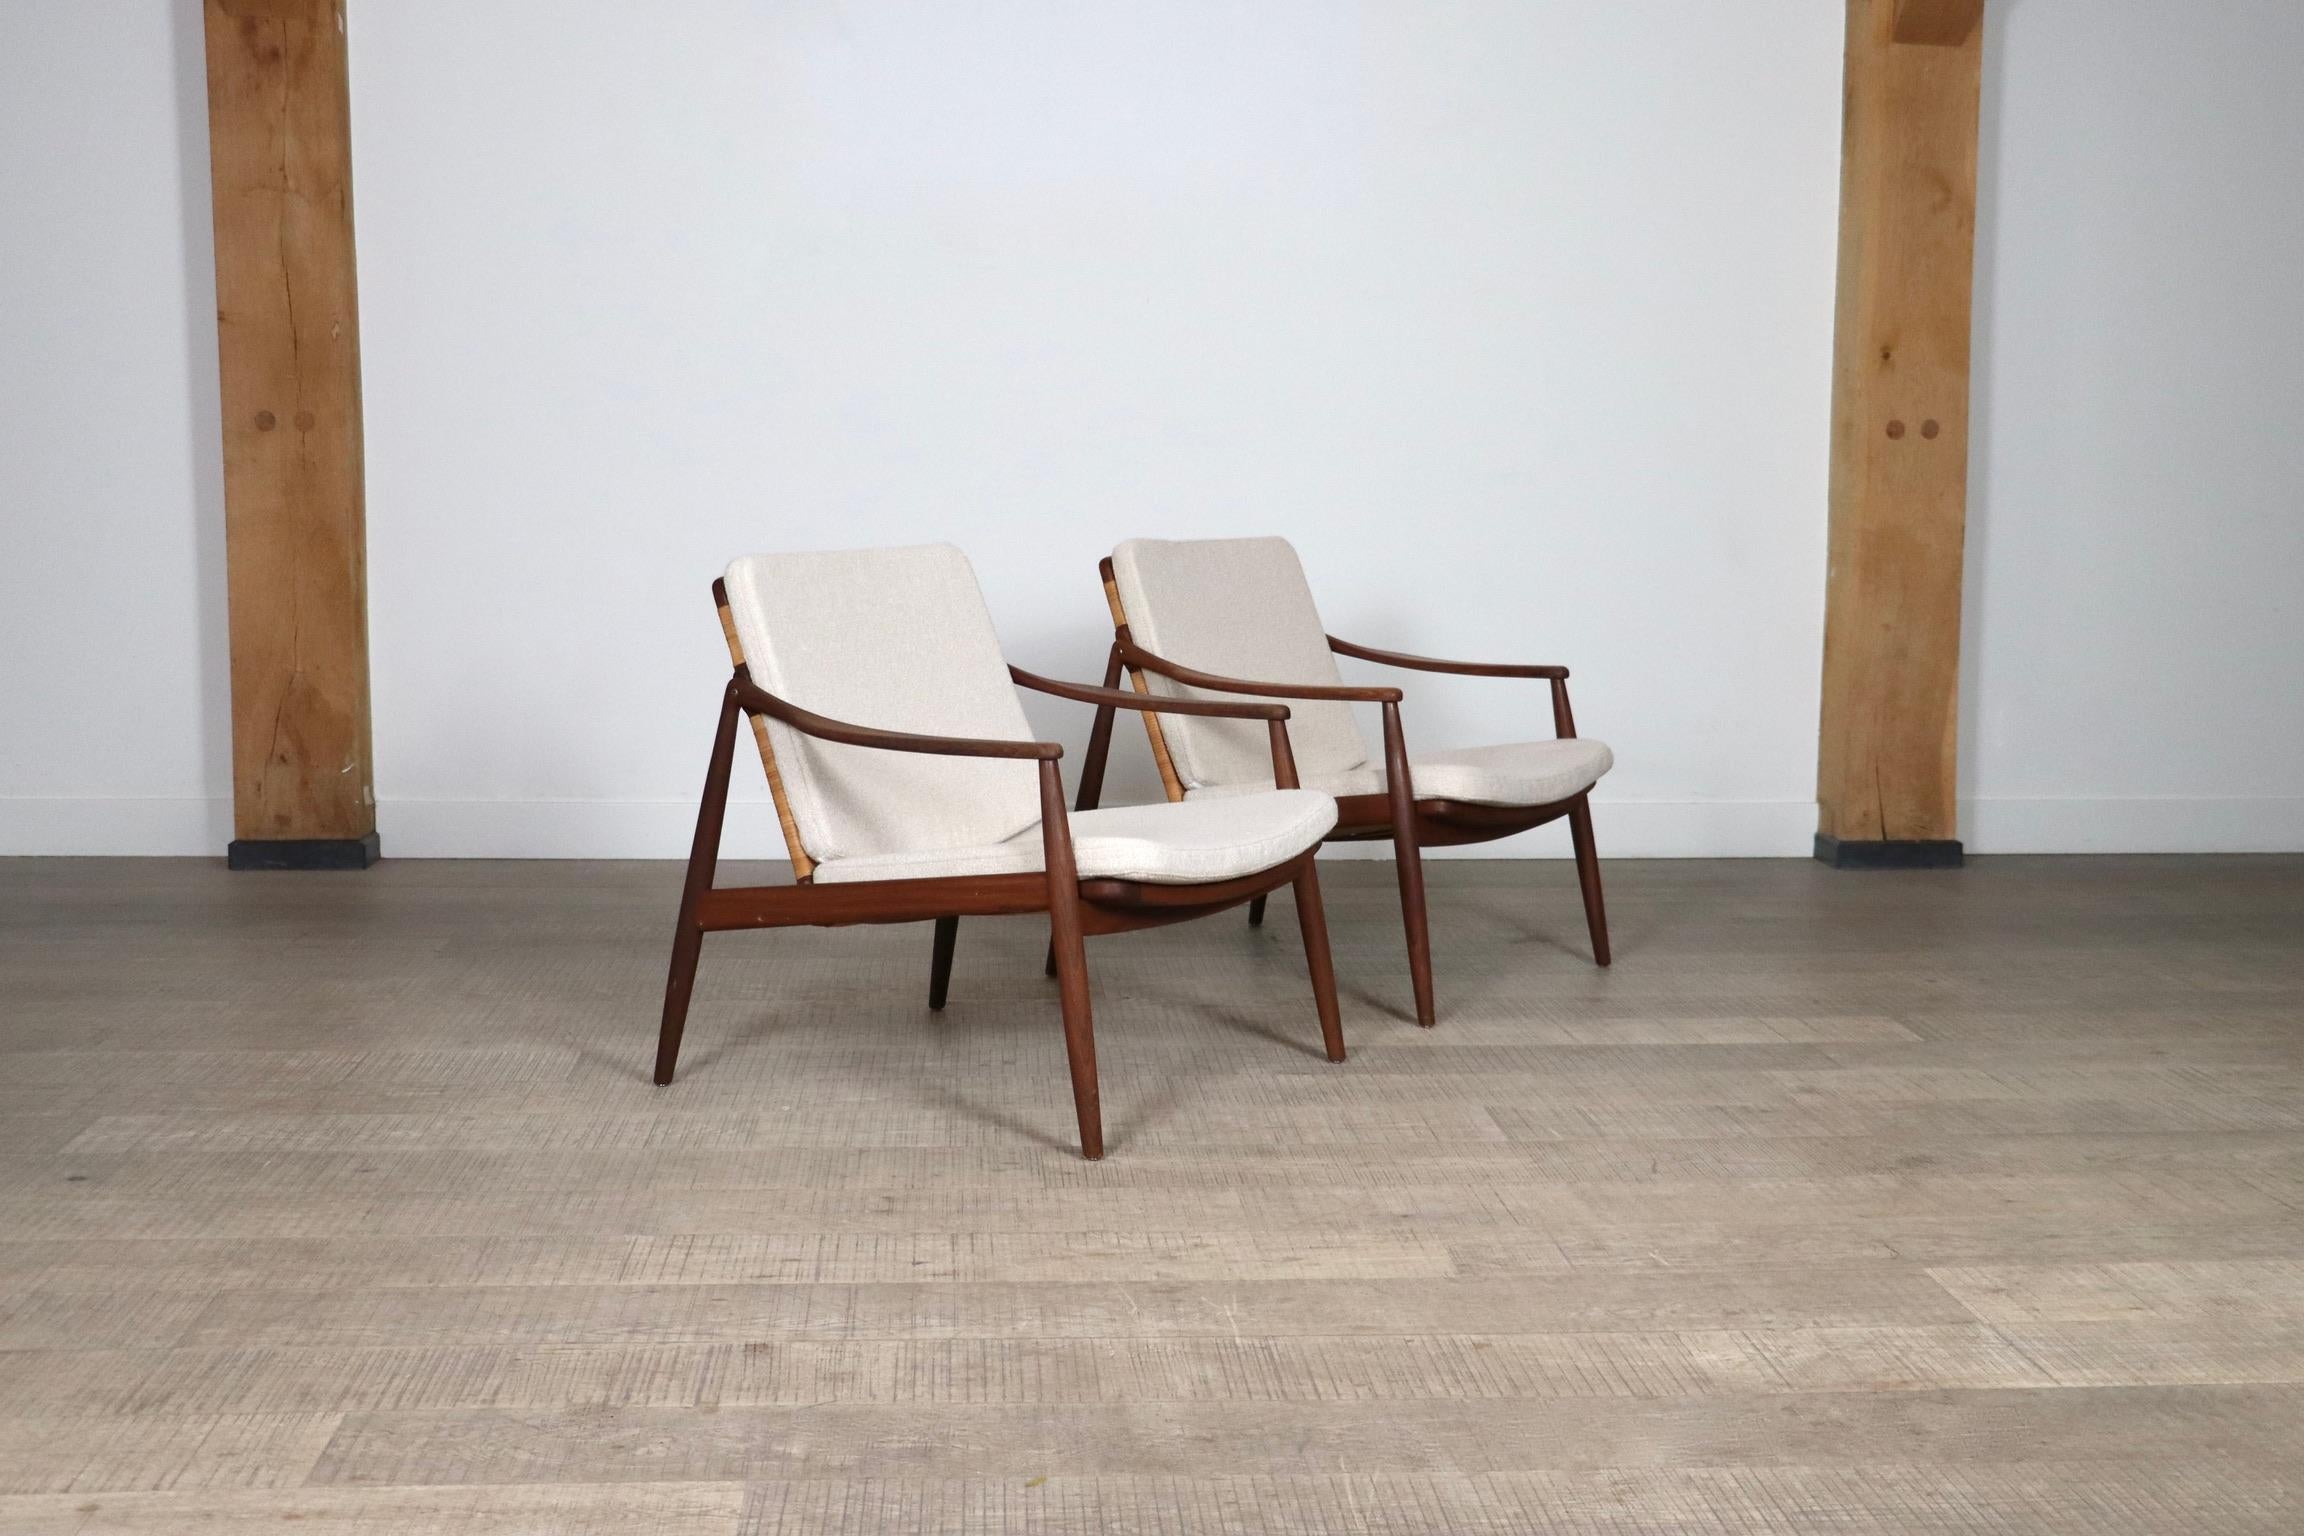 Pair Of Hartmut Lohmeyer Model 400 Lounge Chairs For Wilkhahn, 1959 For Sale 8